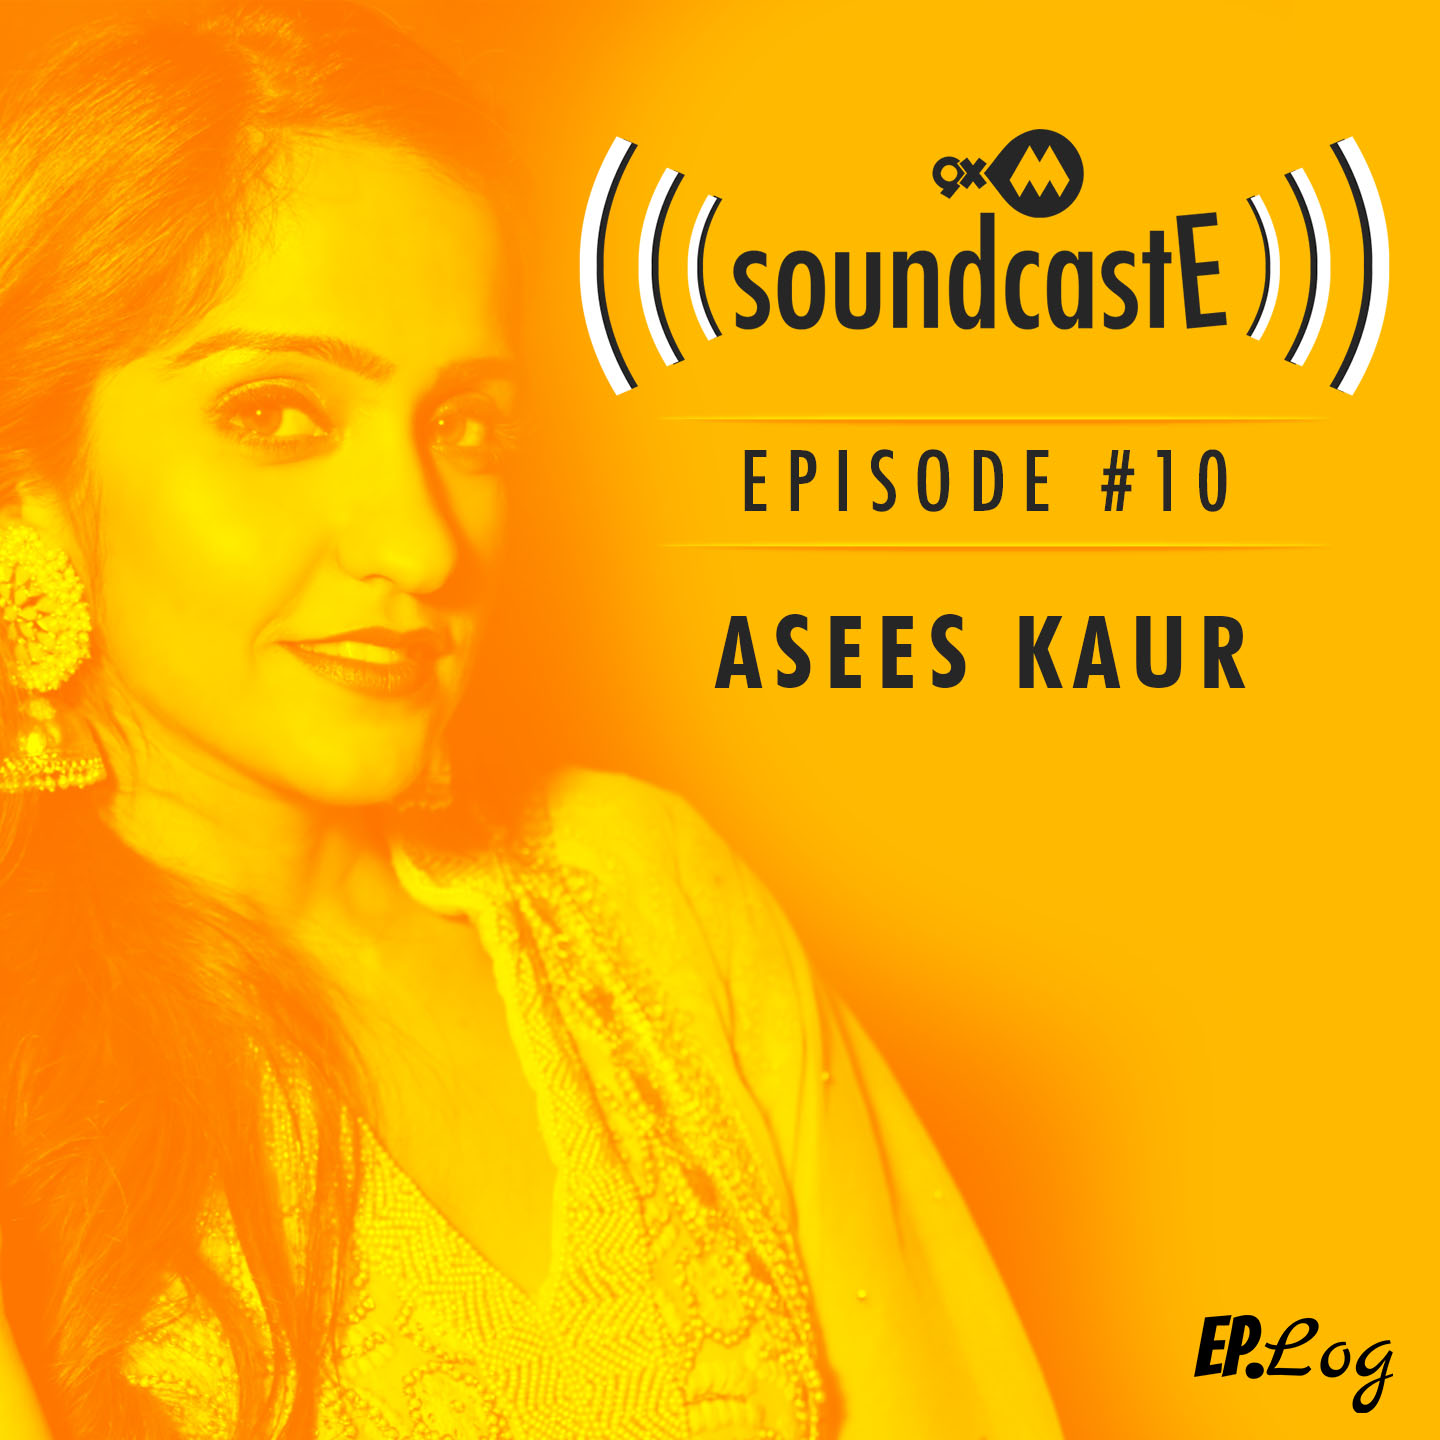 Ep. 10: 9XM SoundcastE with Asees Kaur